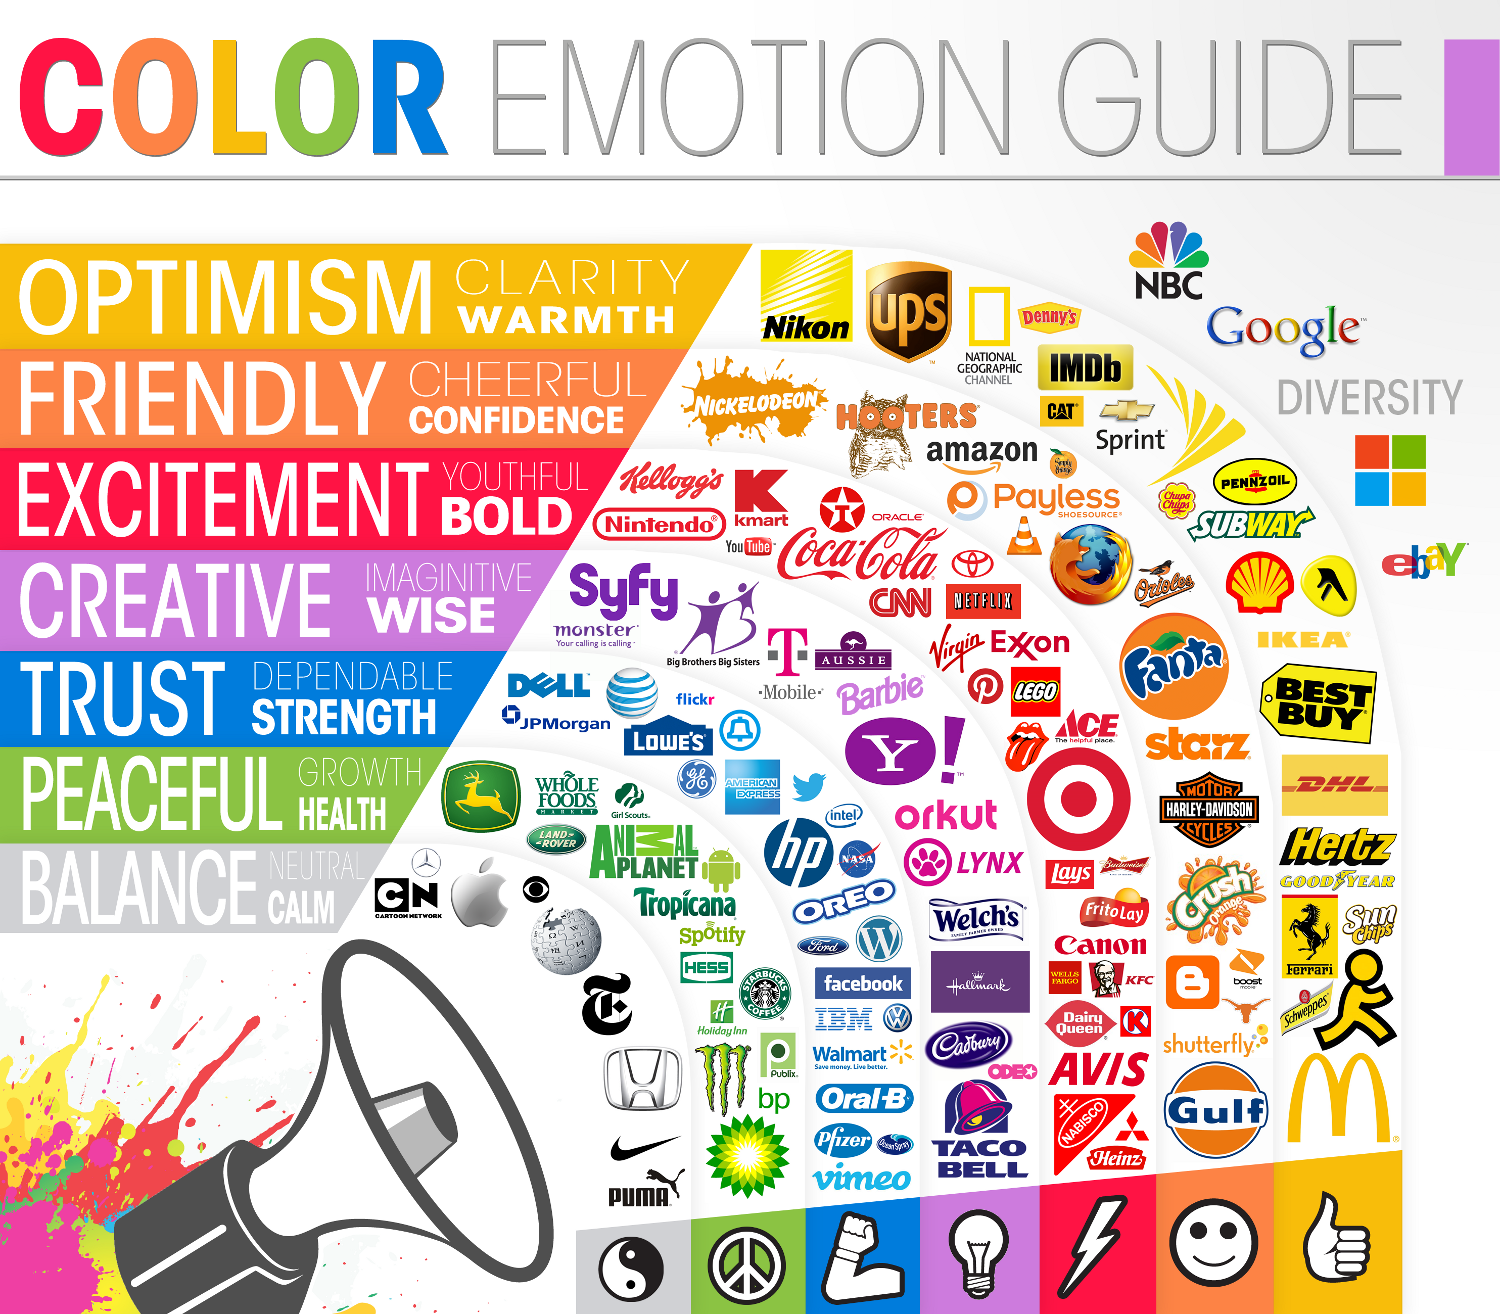 Direct Mail - Color Emotion Guide